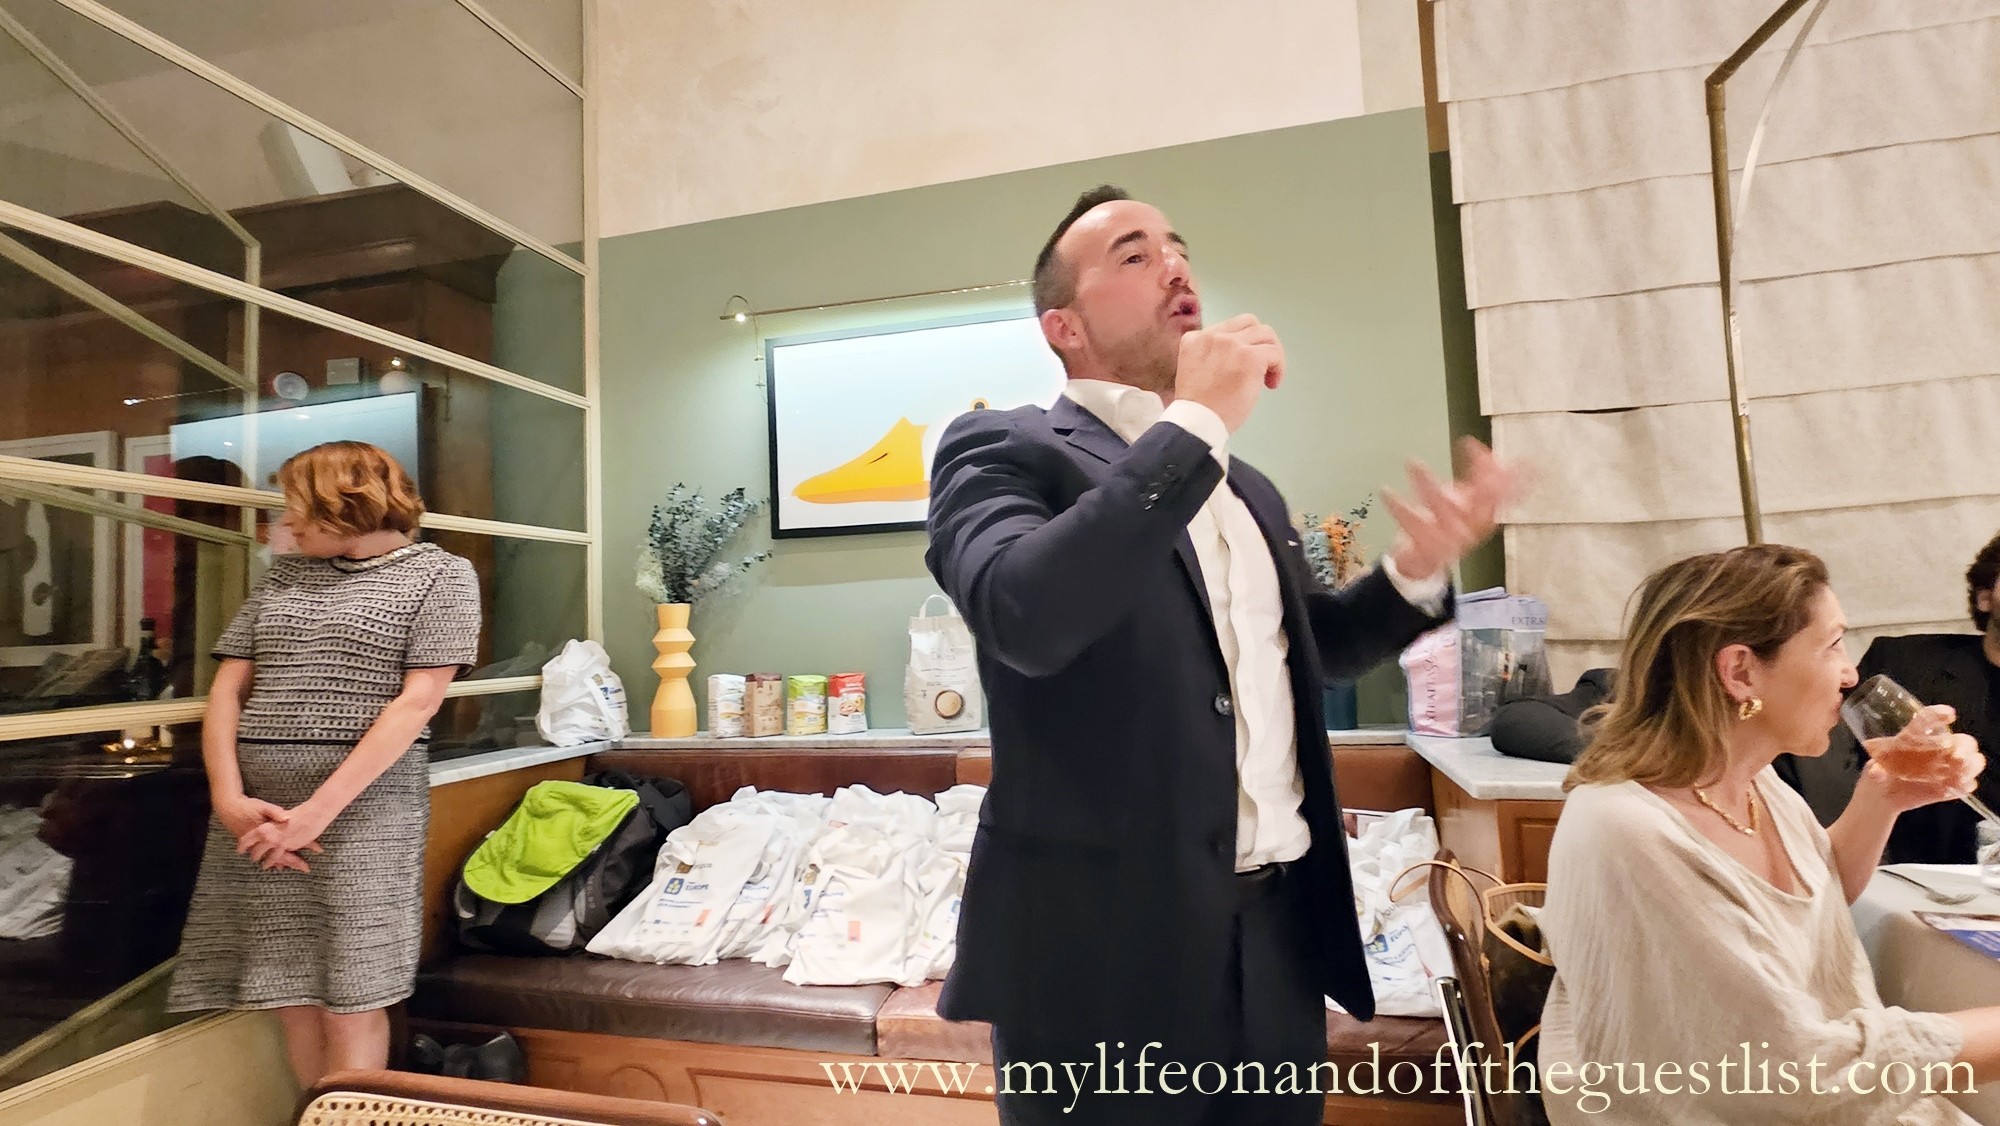 An Evening with Pure Flour From Europe at Eataly's Bar Milano